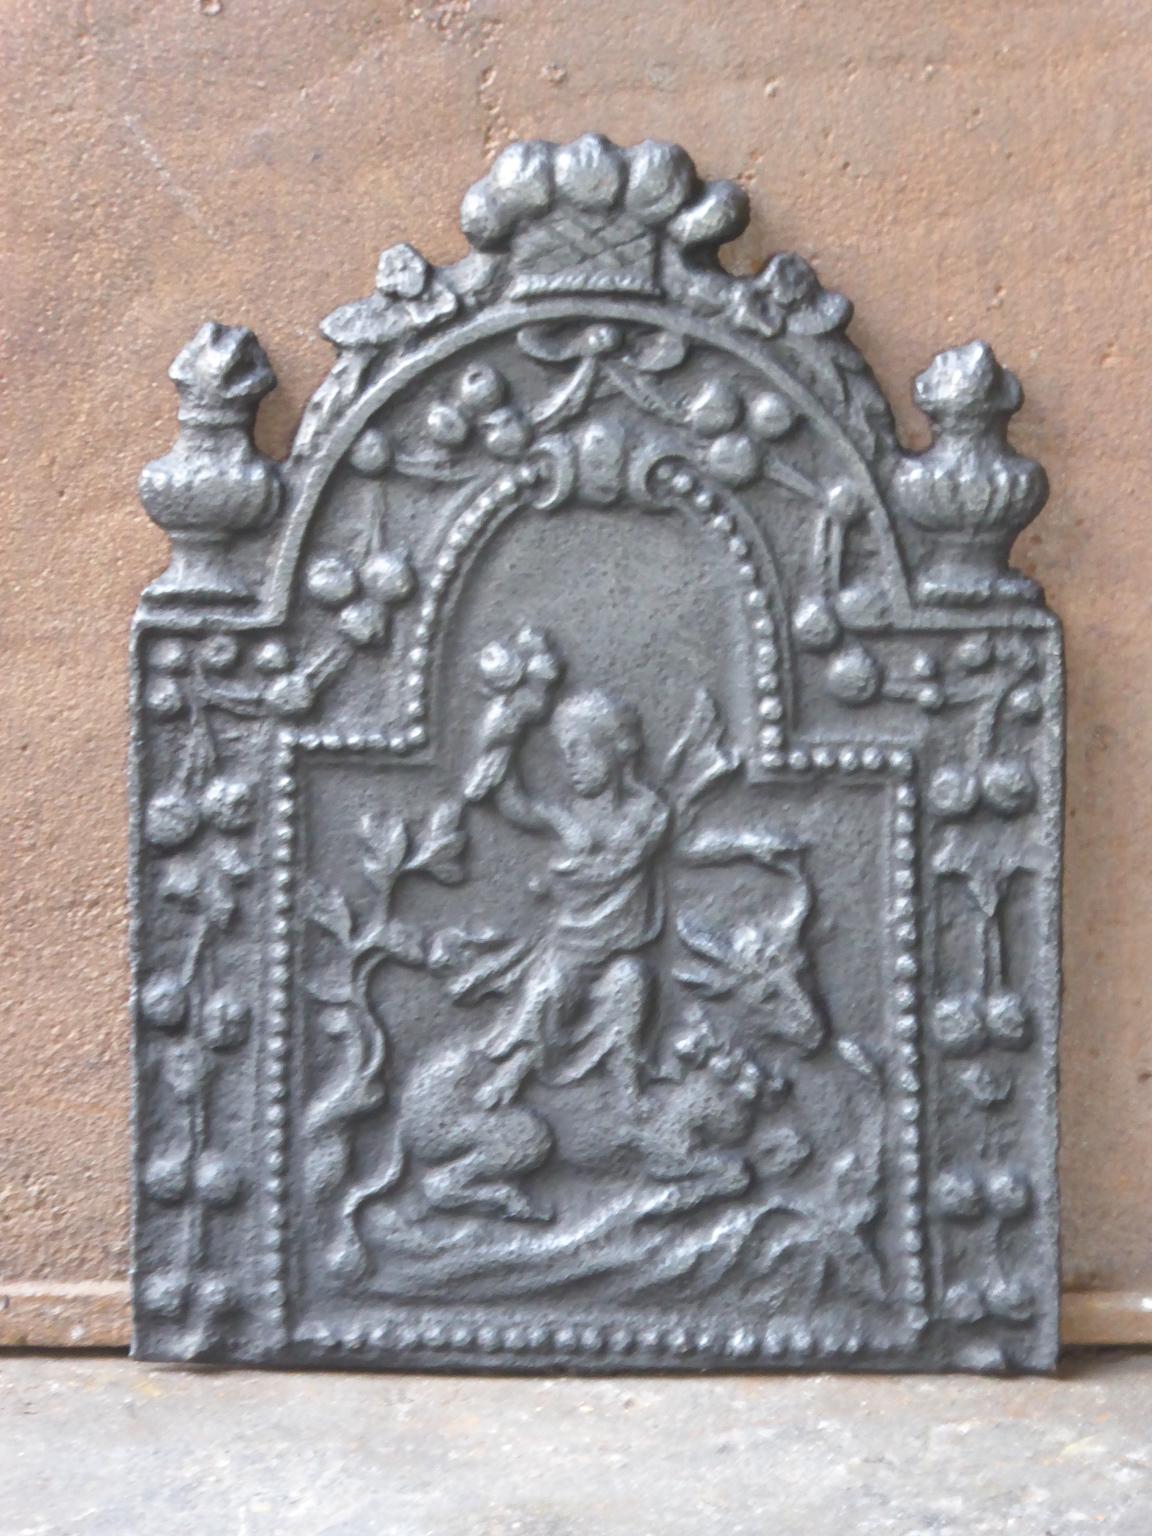 18th century English Georgian fireback with a cupid. The fireback is made of cast iron and has a black / pewter patina. It is in a good condition, without cracks.